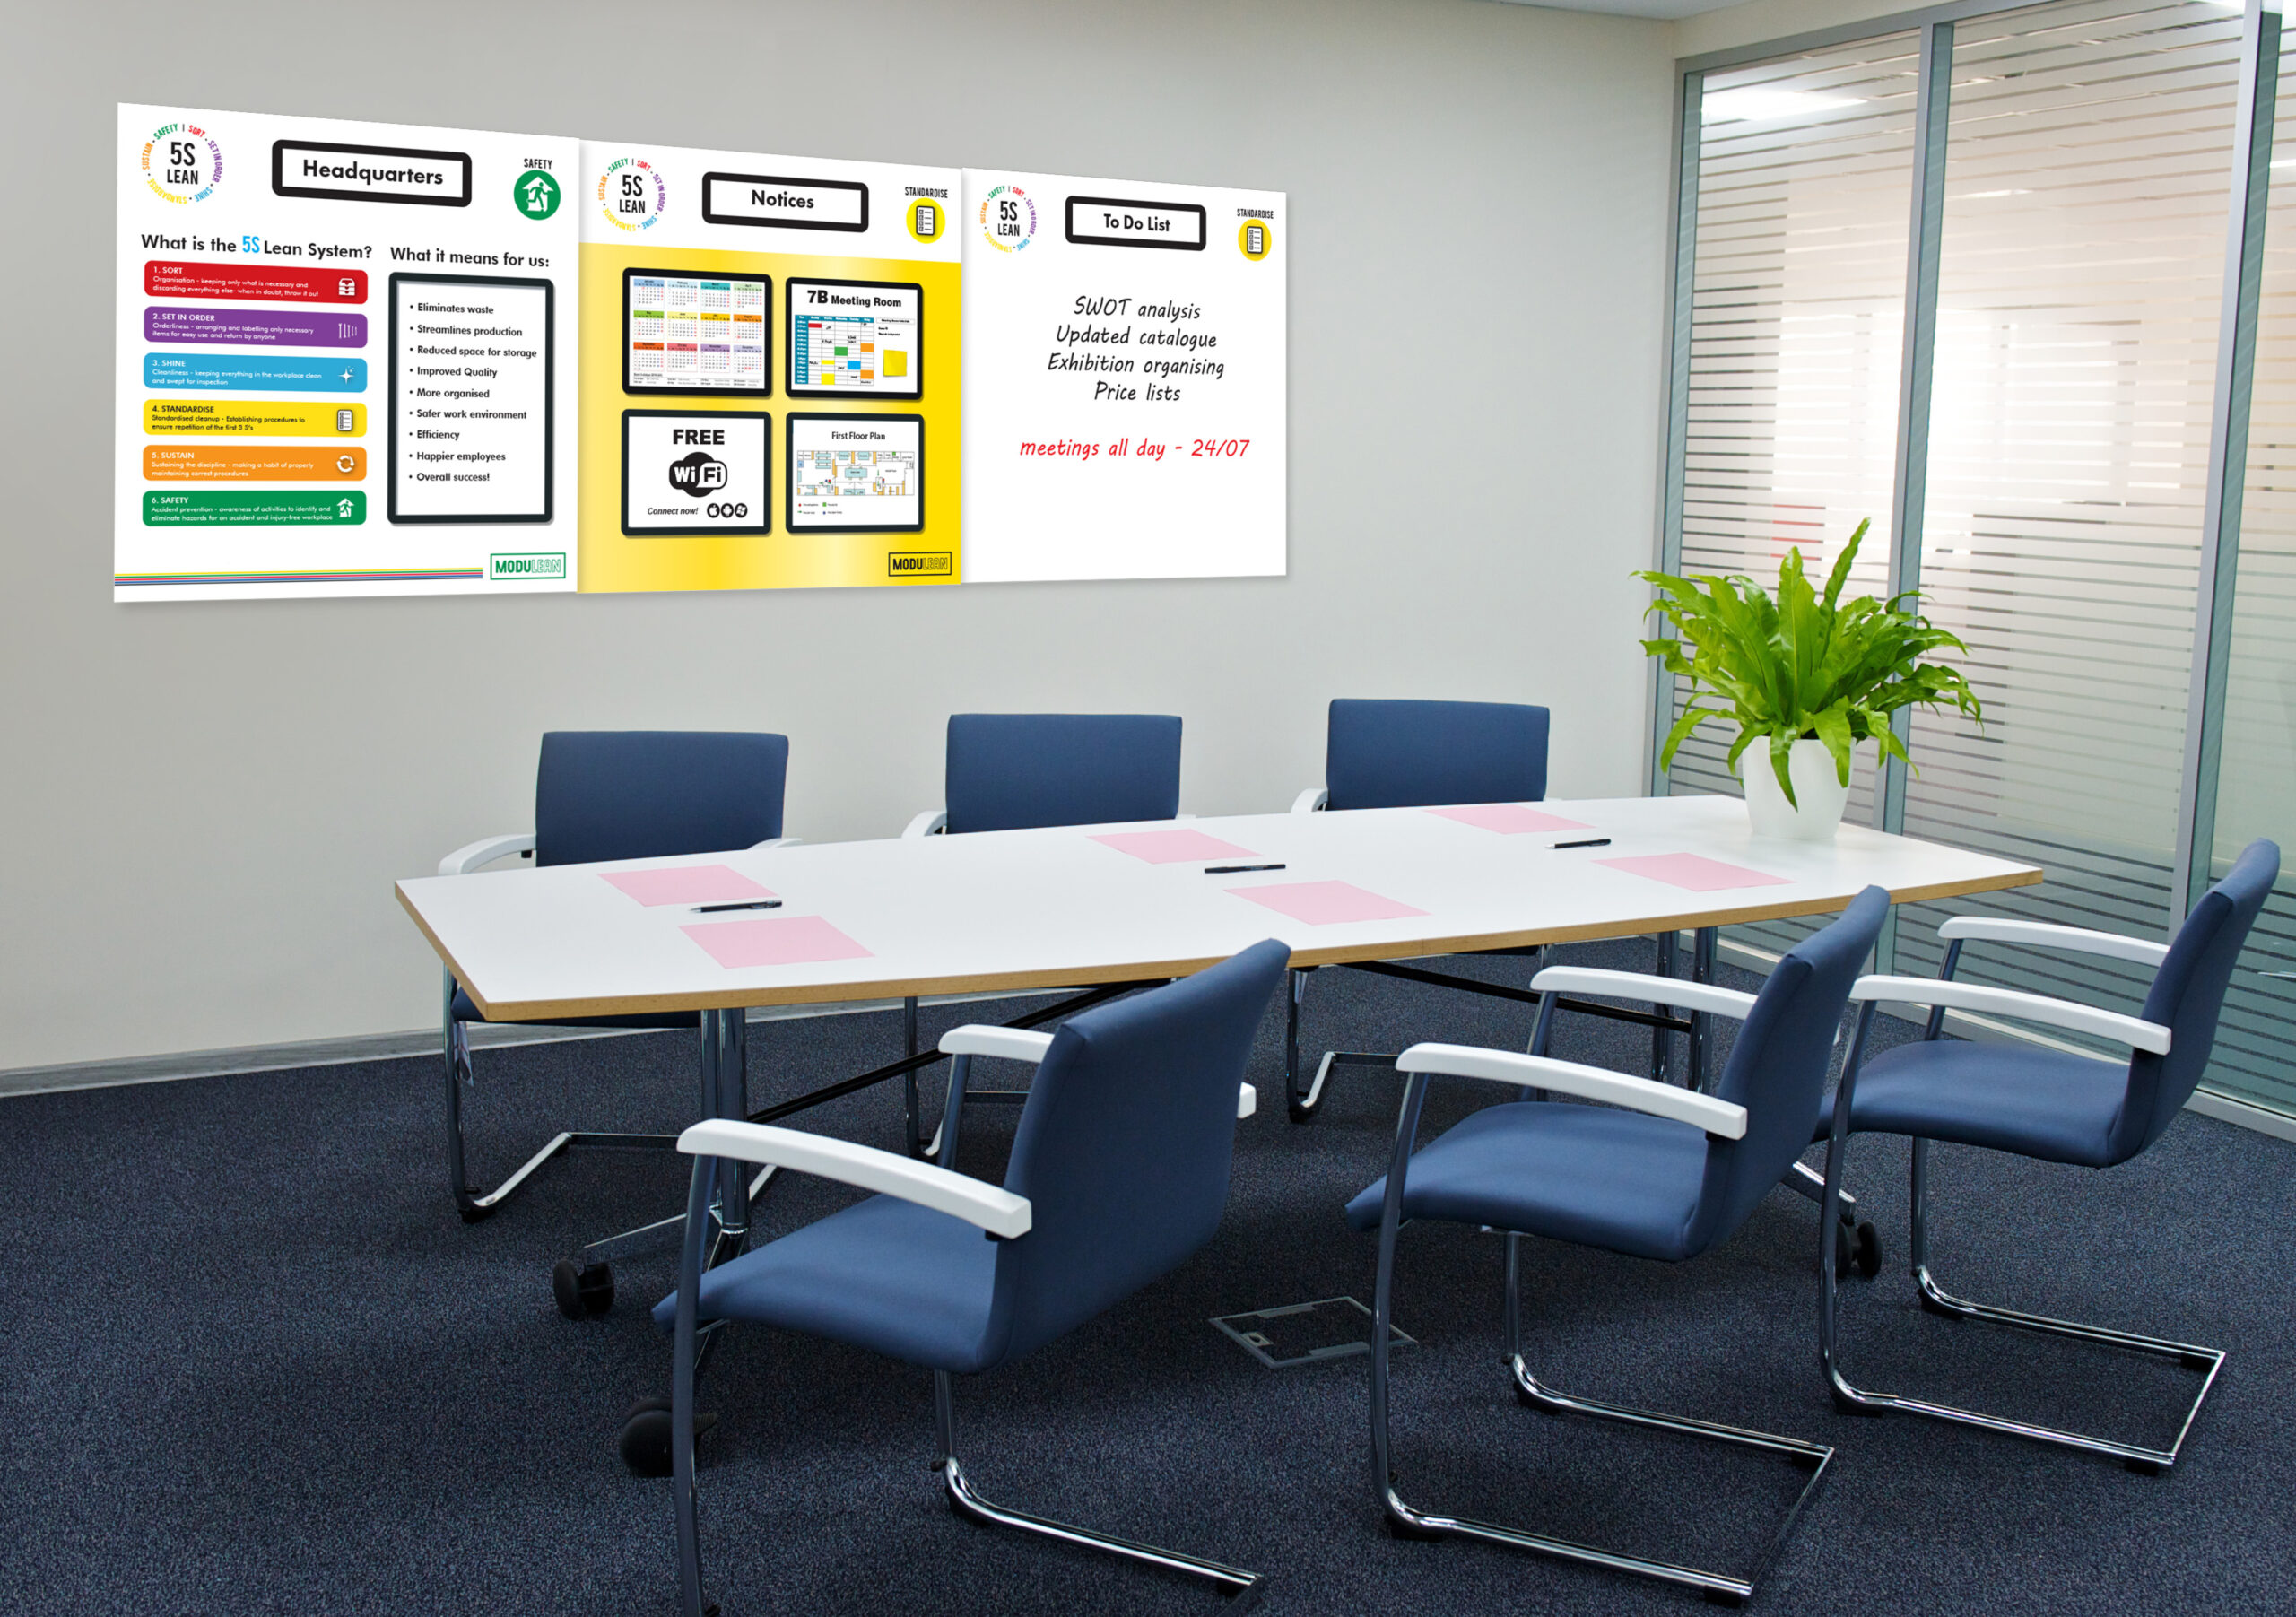 modulean 5s lean shadow boards office meeting room notice board easy wipe magnetic board 5s lean system explained vis comm boards